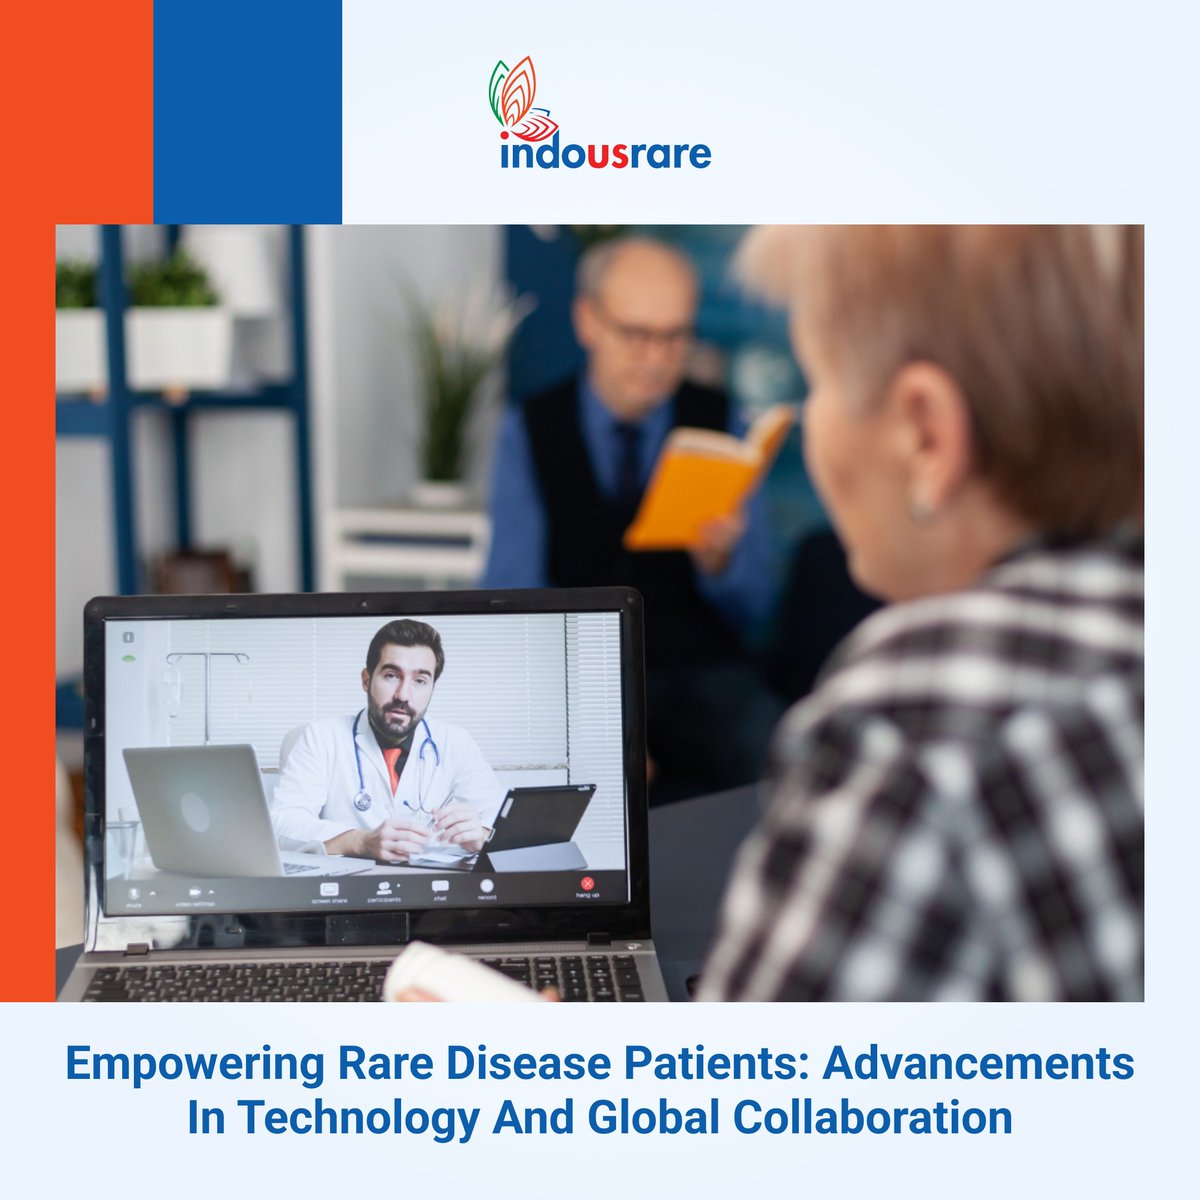 11000 #rarediseases exist globally. Organizations like @RareDiseasesInt & @UDNIss work to ace #therapydevelopment. #decentralizedtrials is trending in #patientcare. Learn more: buff.ly/3TXGLYX Join us: buff.ly/3PZaxeM To donate: buff.ly/3Q0KYK2 #indousrare